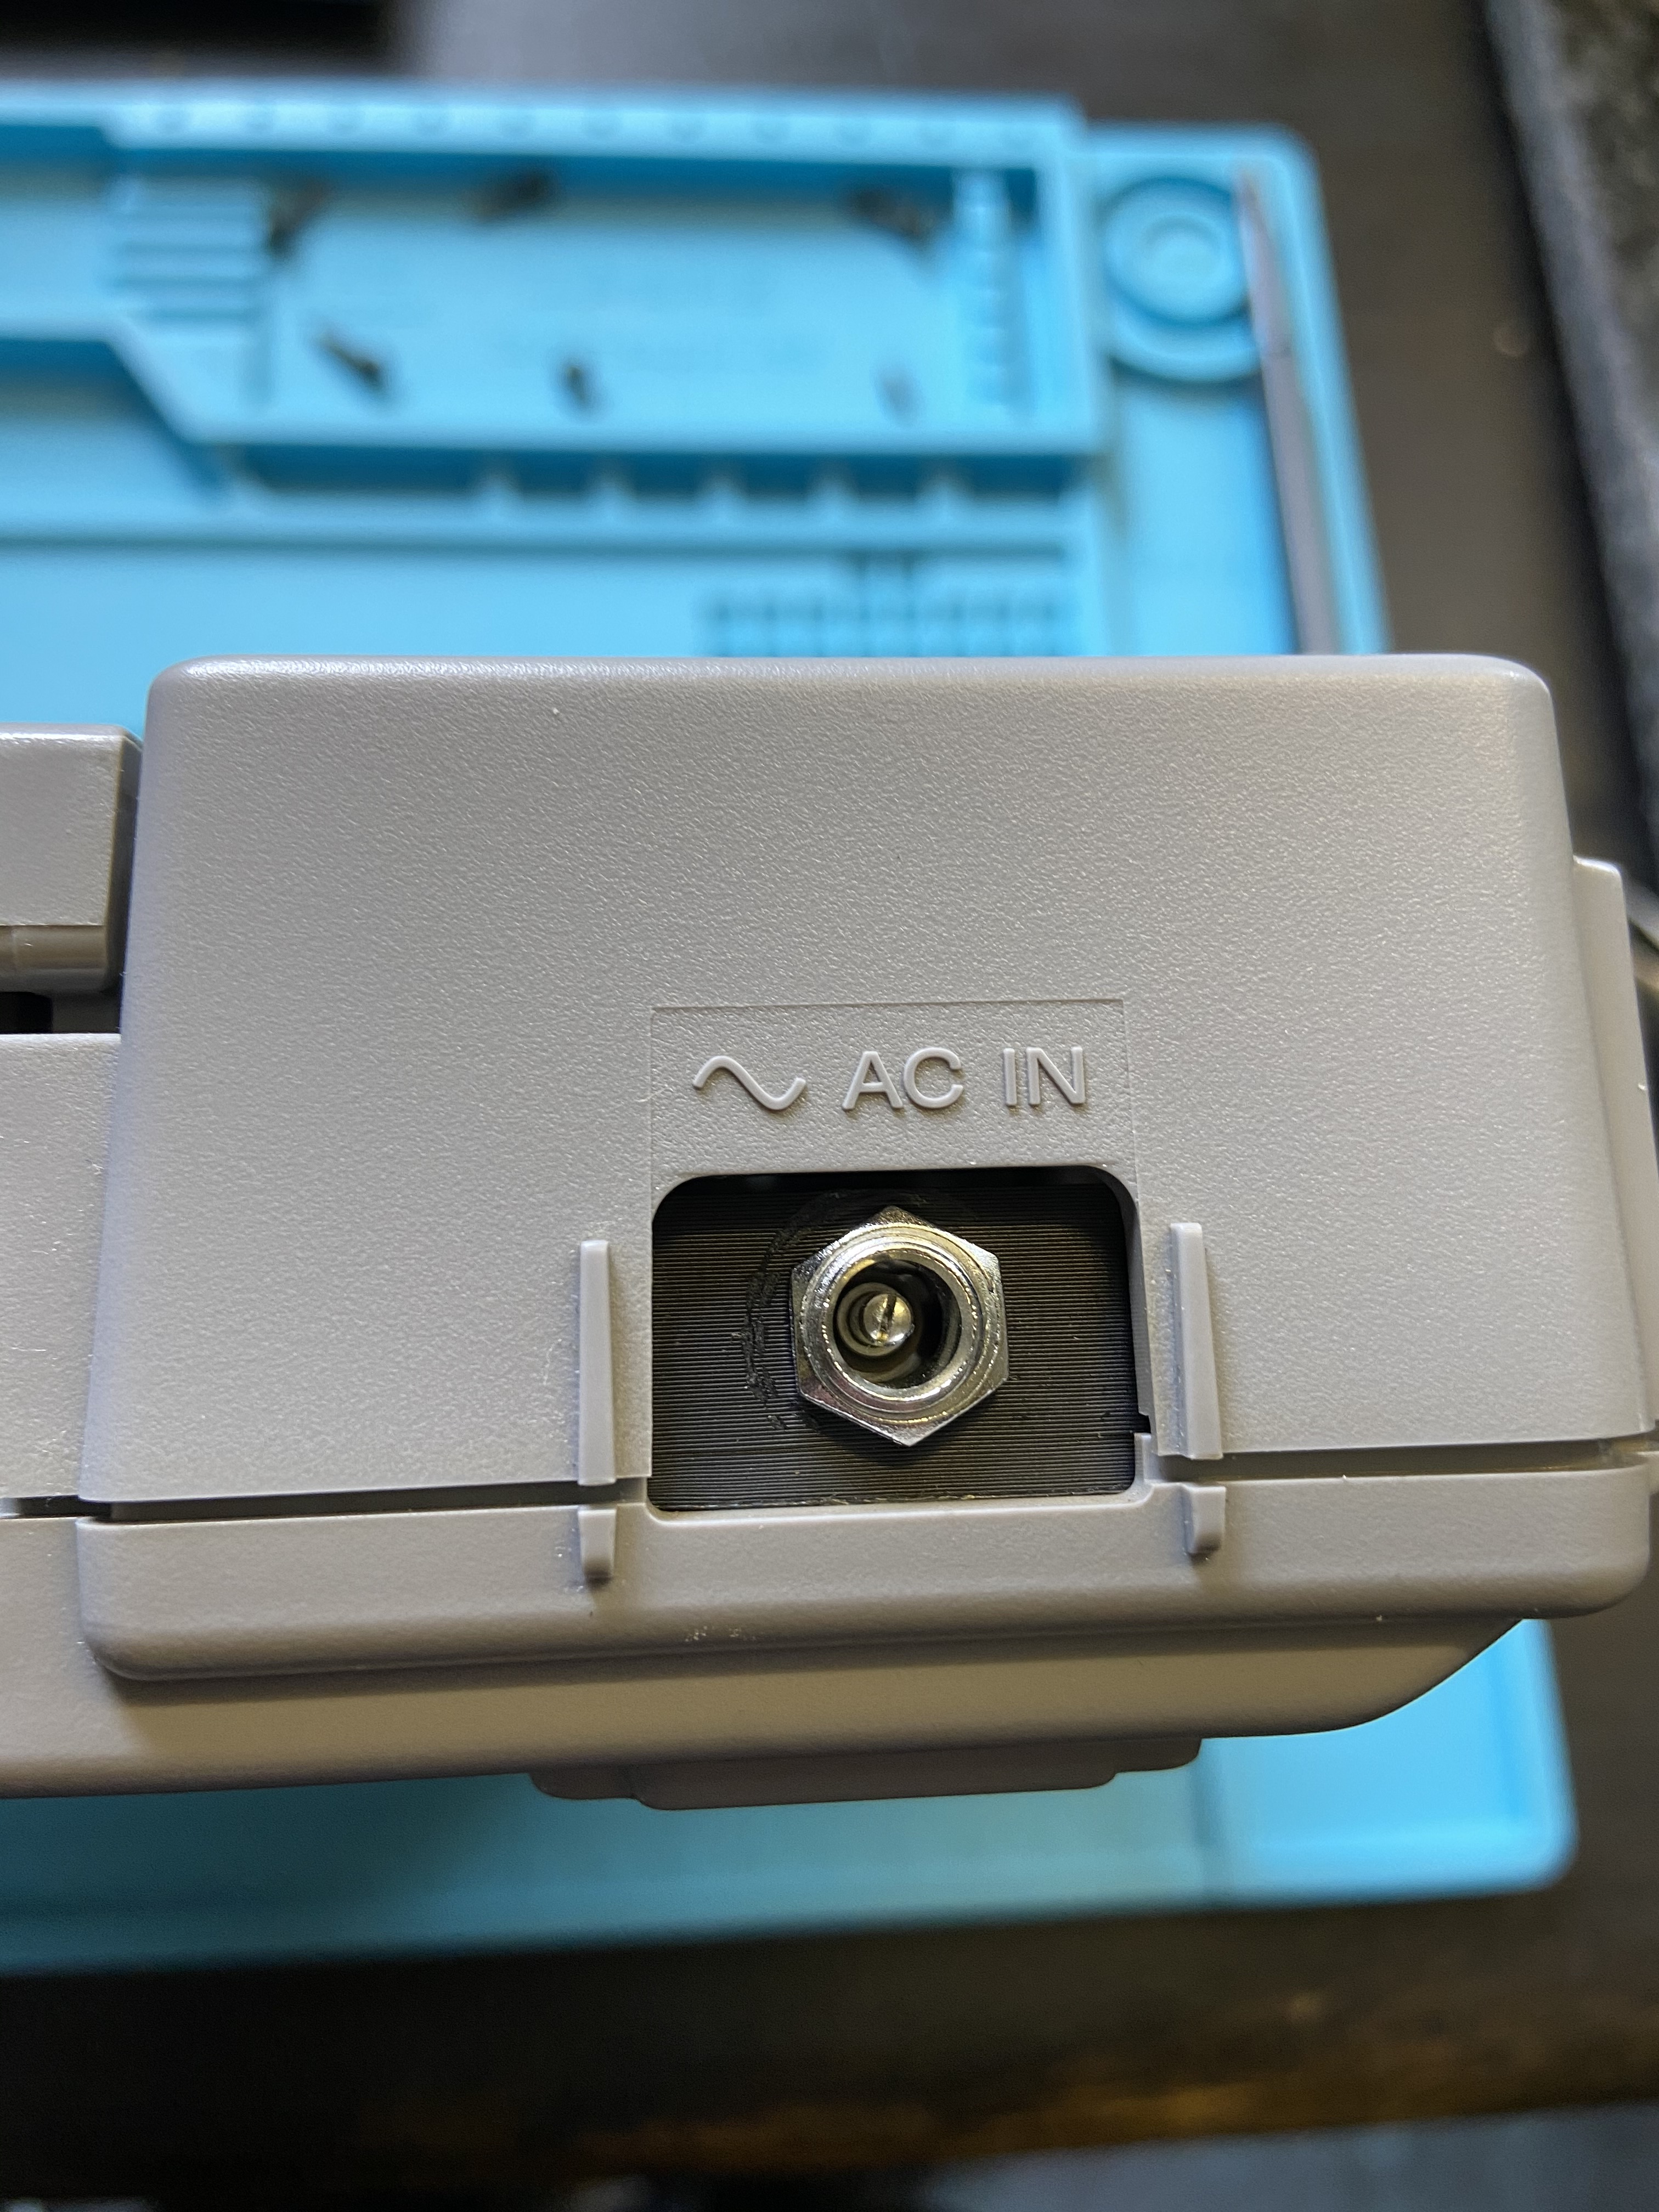 Aftermarket DC input jack installed in a PlayStation